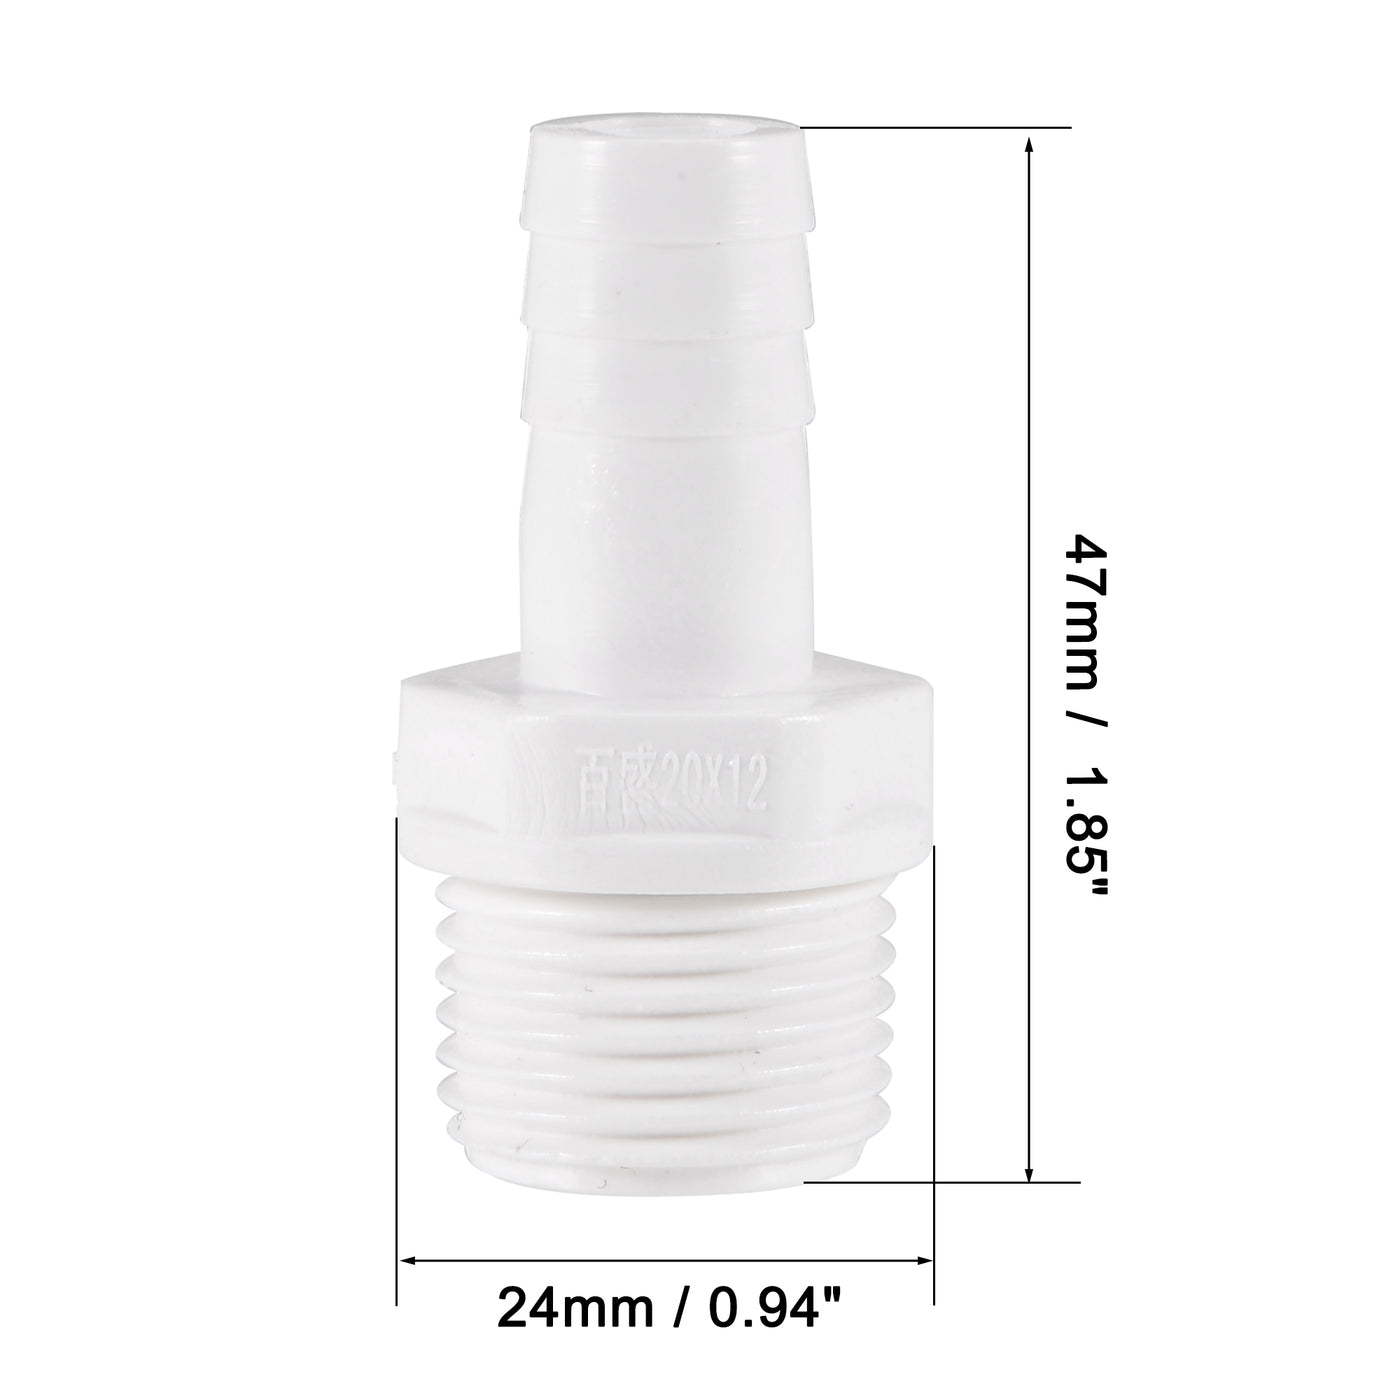 uxcell Uxcell PVC Tube Fitting Adapter 12mm Barbed x G1/2 Male White for Aquariums, Water Tanks, Tubs, Pools 6Pcs